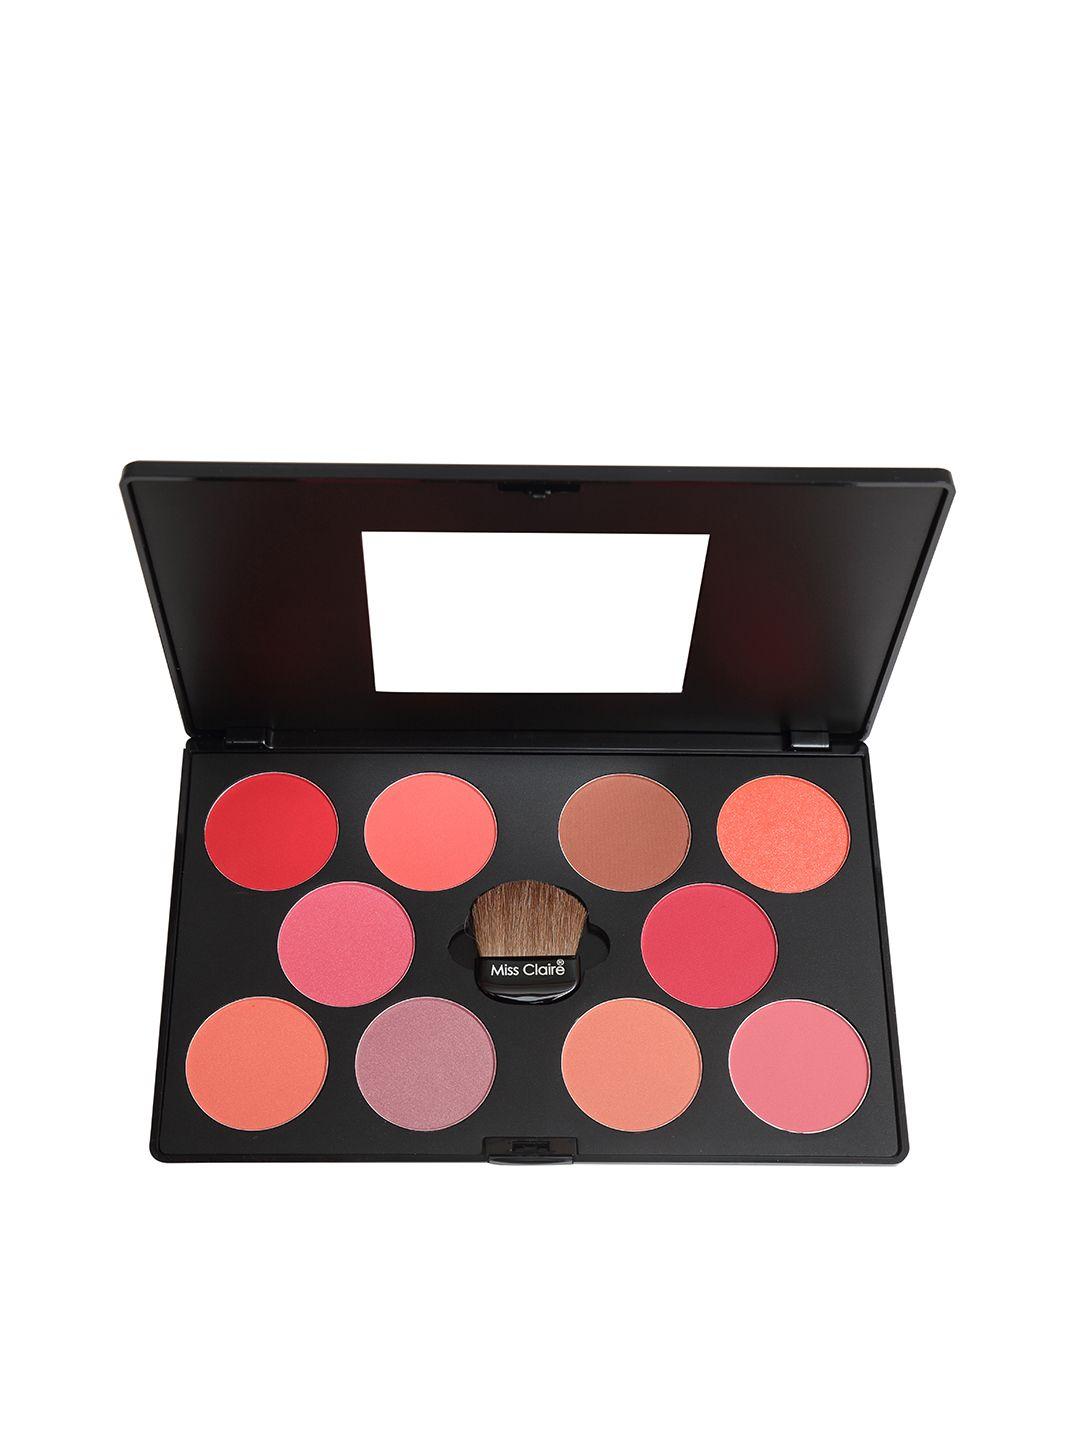 miss claire 3 professional blusher palette 45 g